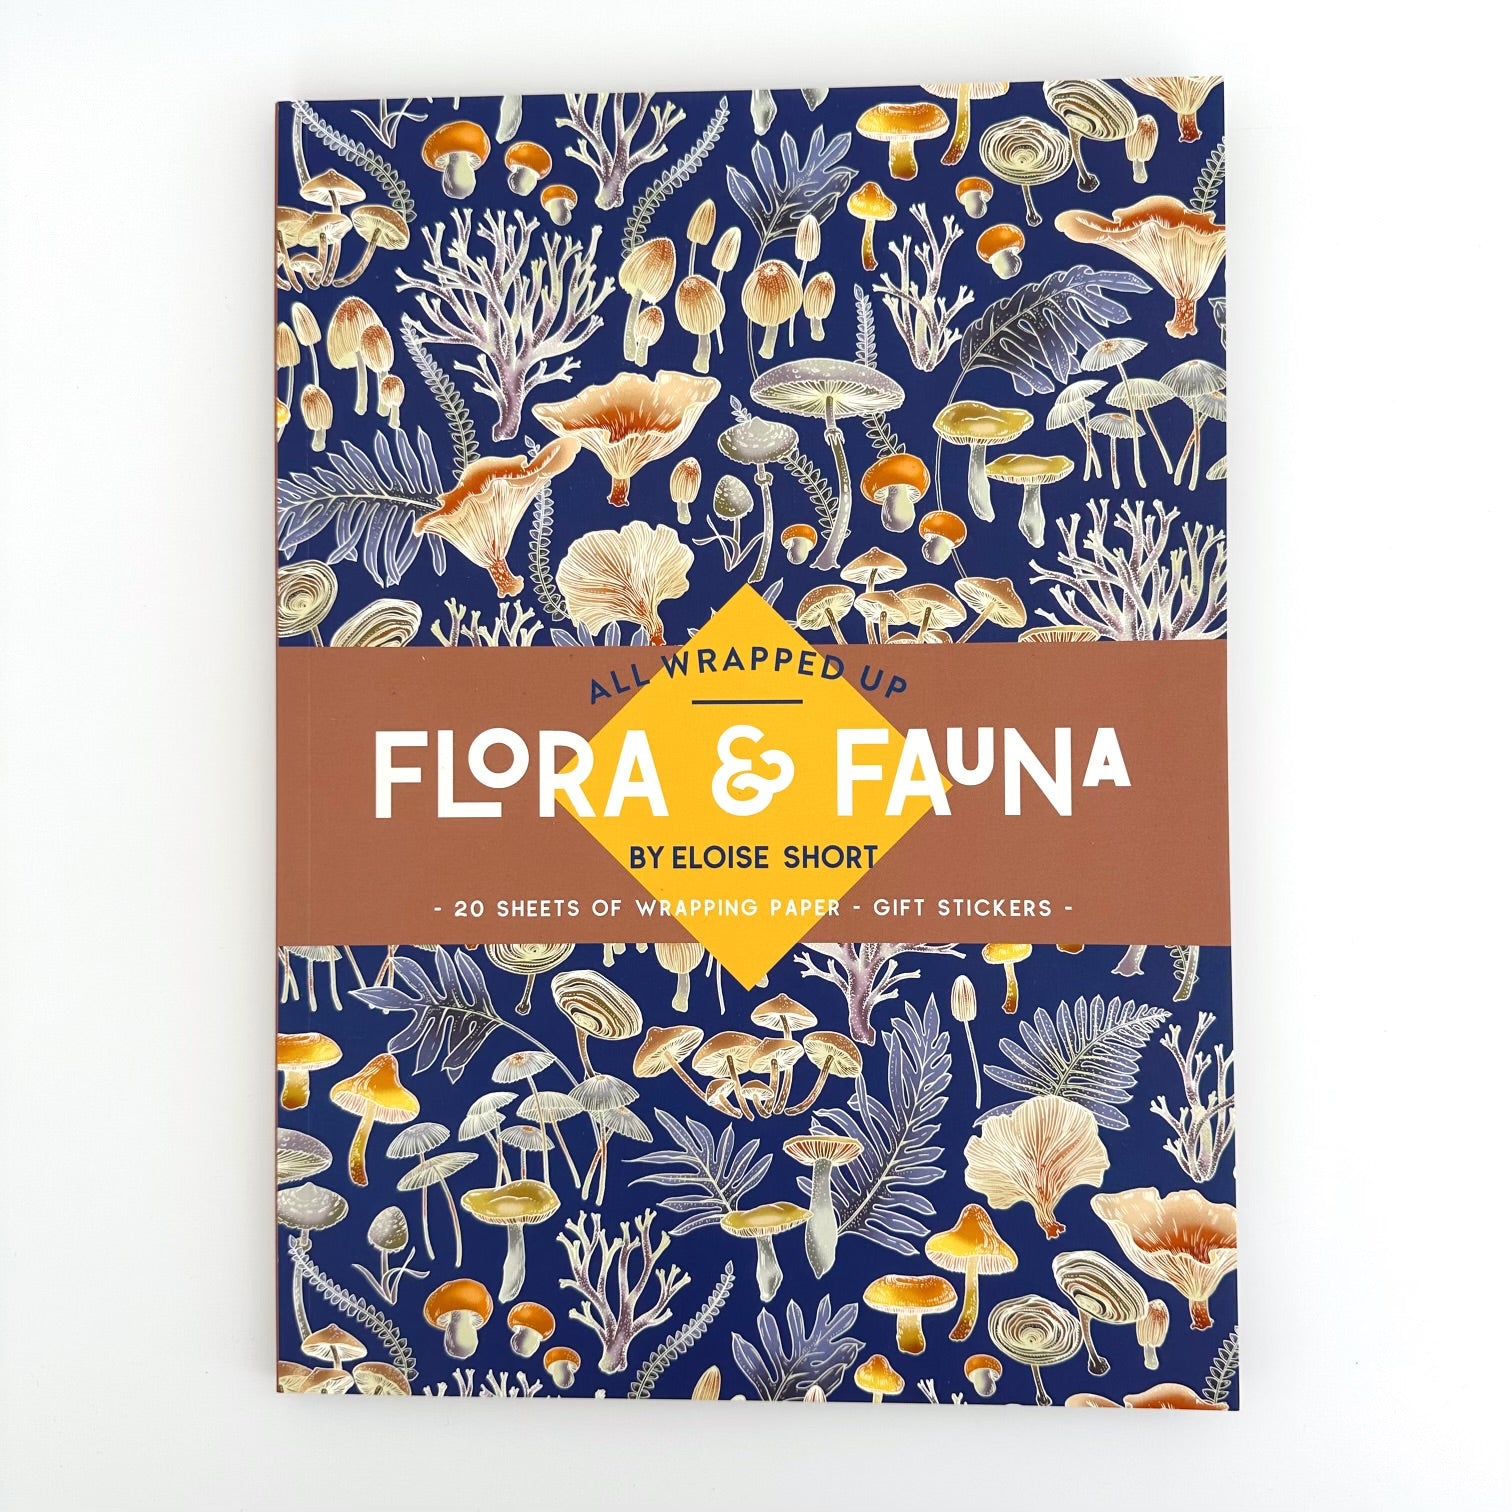 ALL WRAPPED UP: FLORA & FAUNA